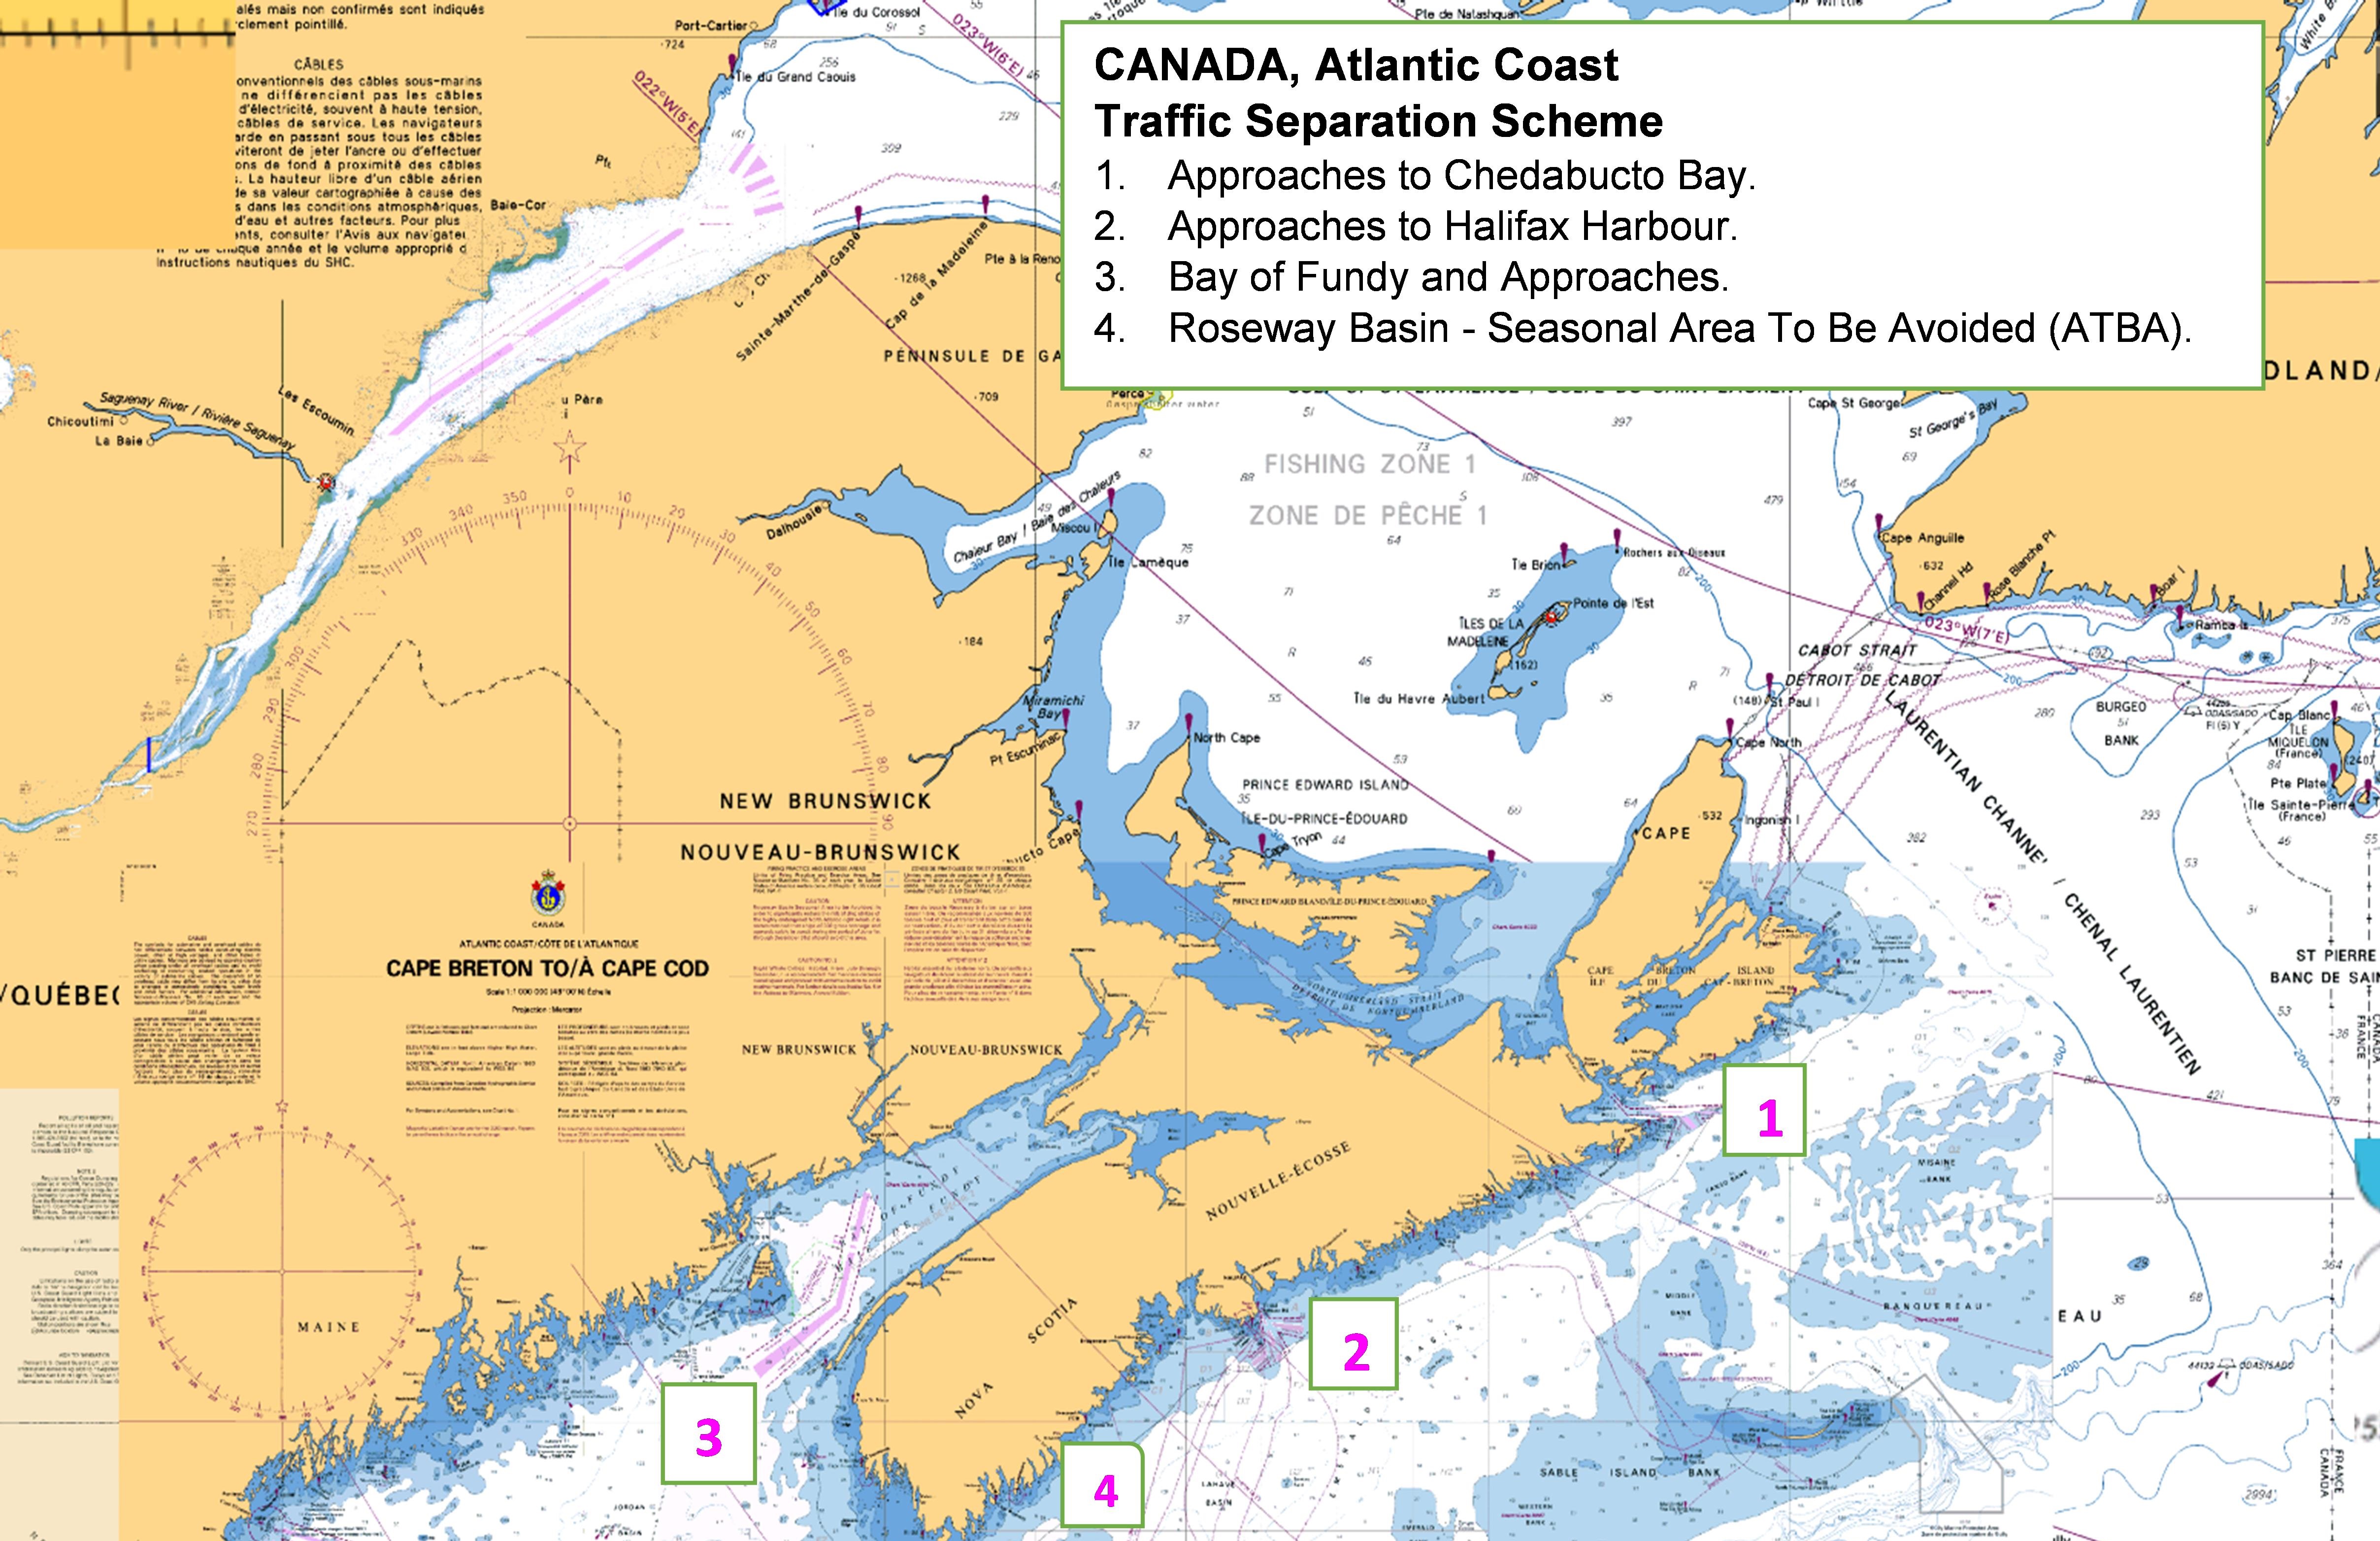 Atlantic and Pacific Coasts Recommended Routeing System